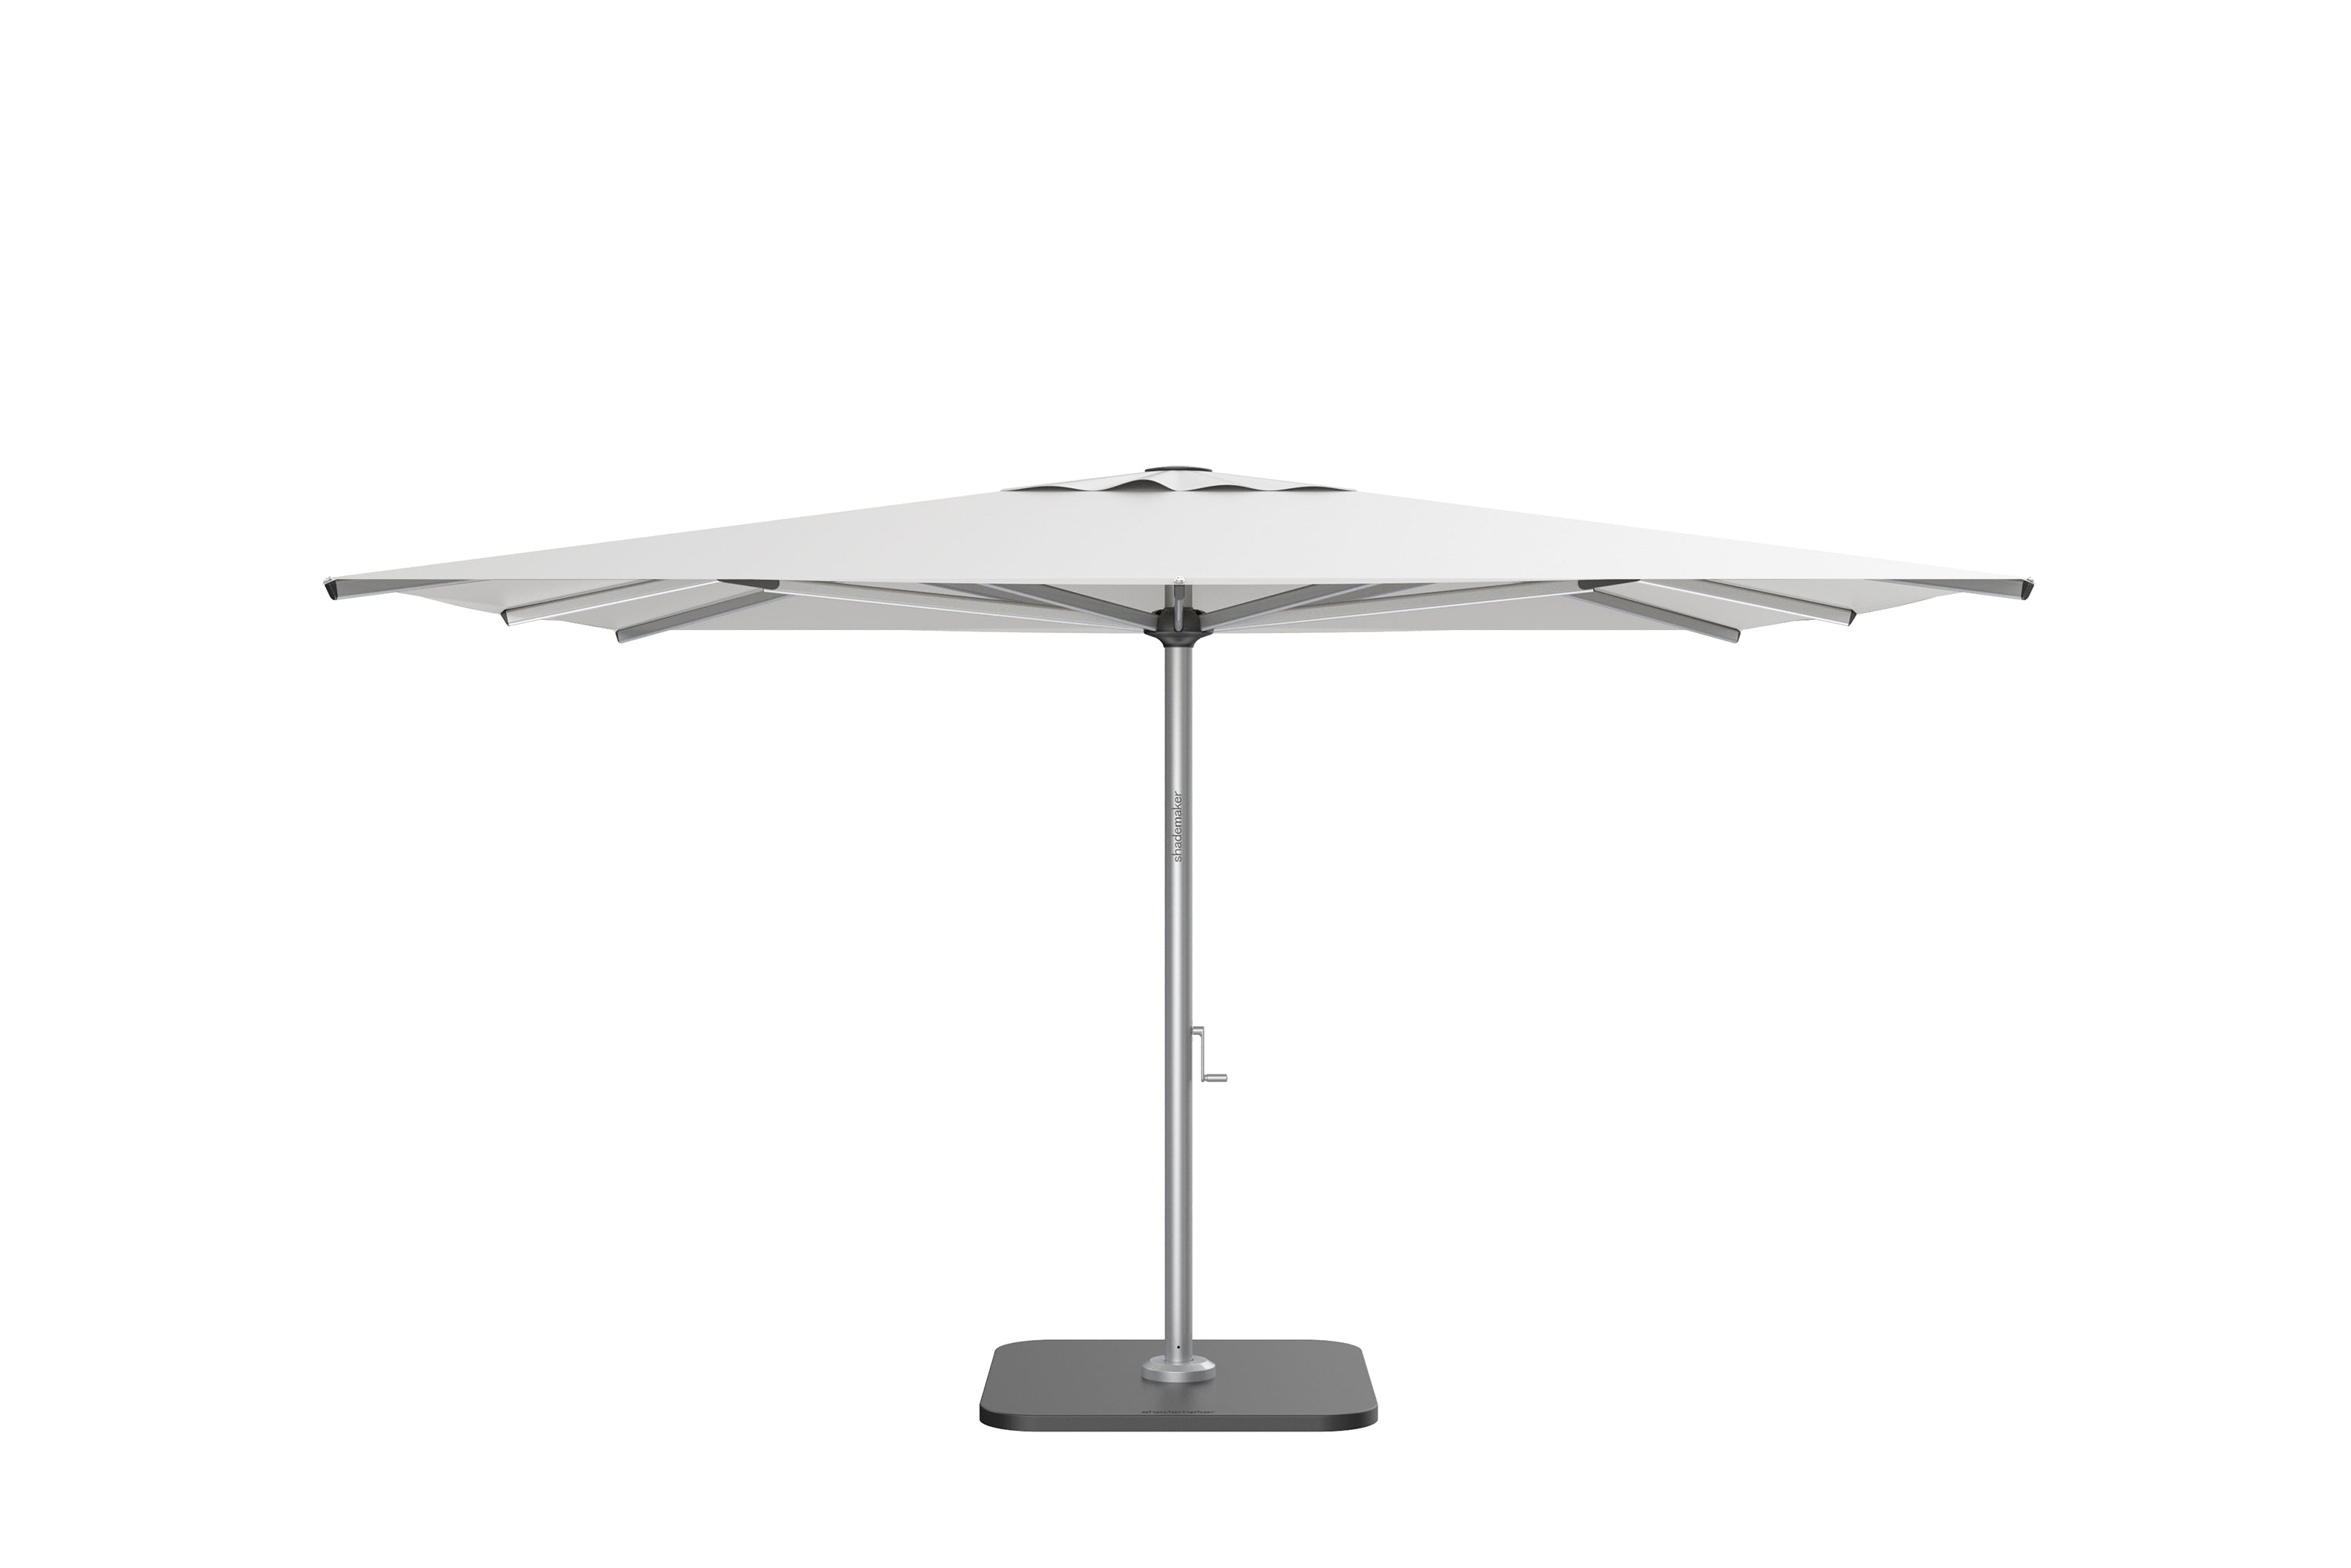 16.5 ft Square Astral Umbrella by Shademaker